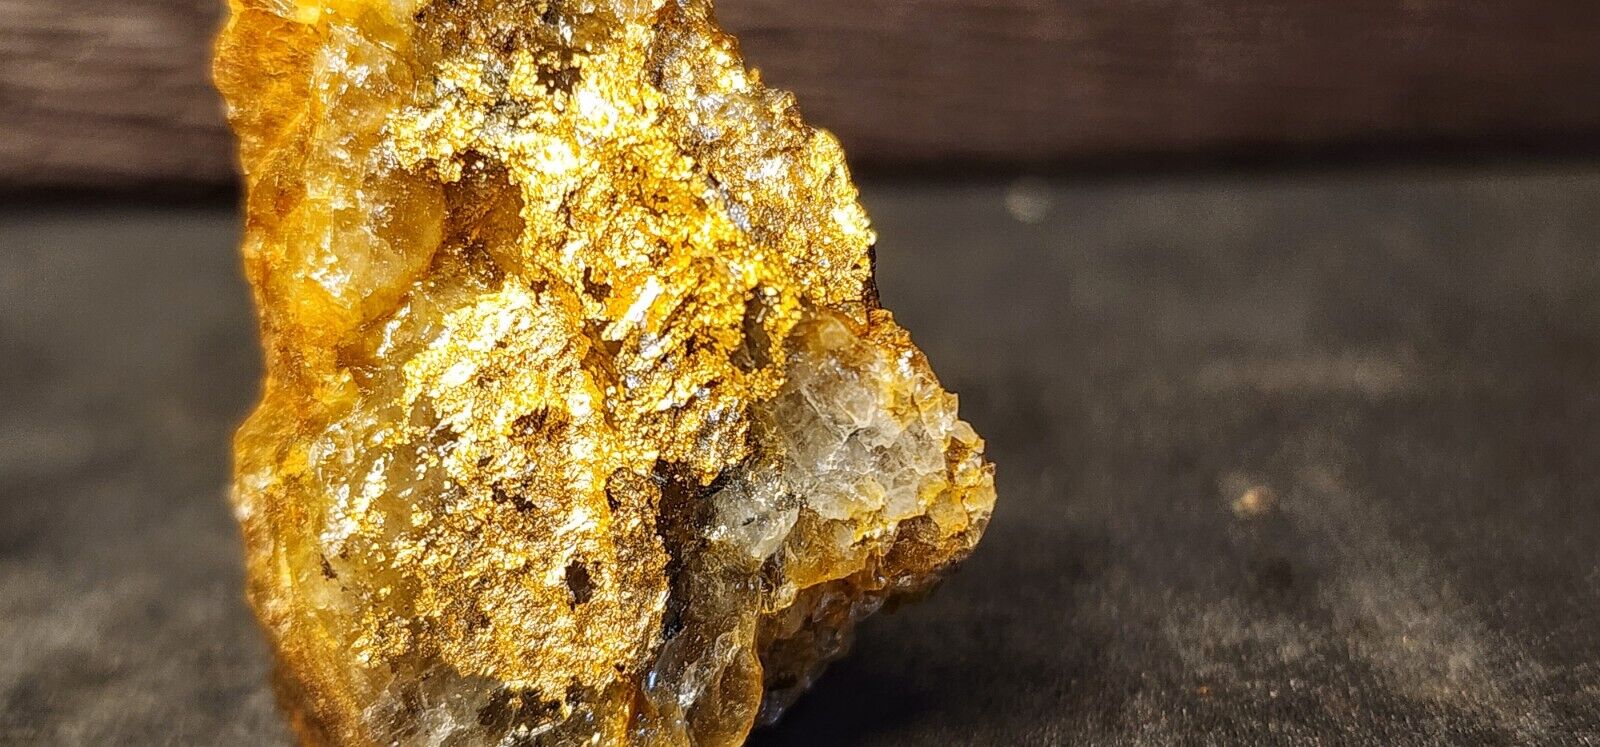 Gold Ore Specimen 11.7g Crystalline Gold With Silver - 2522